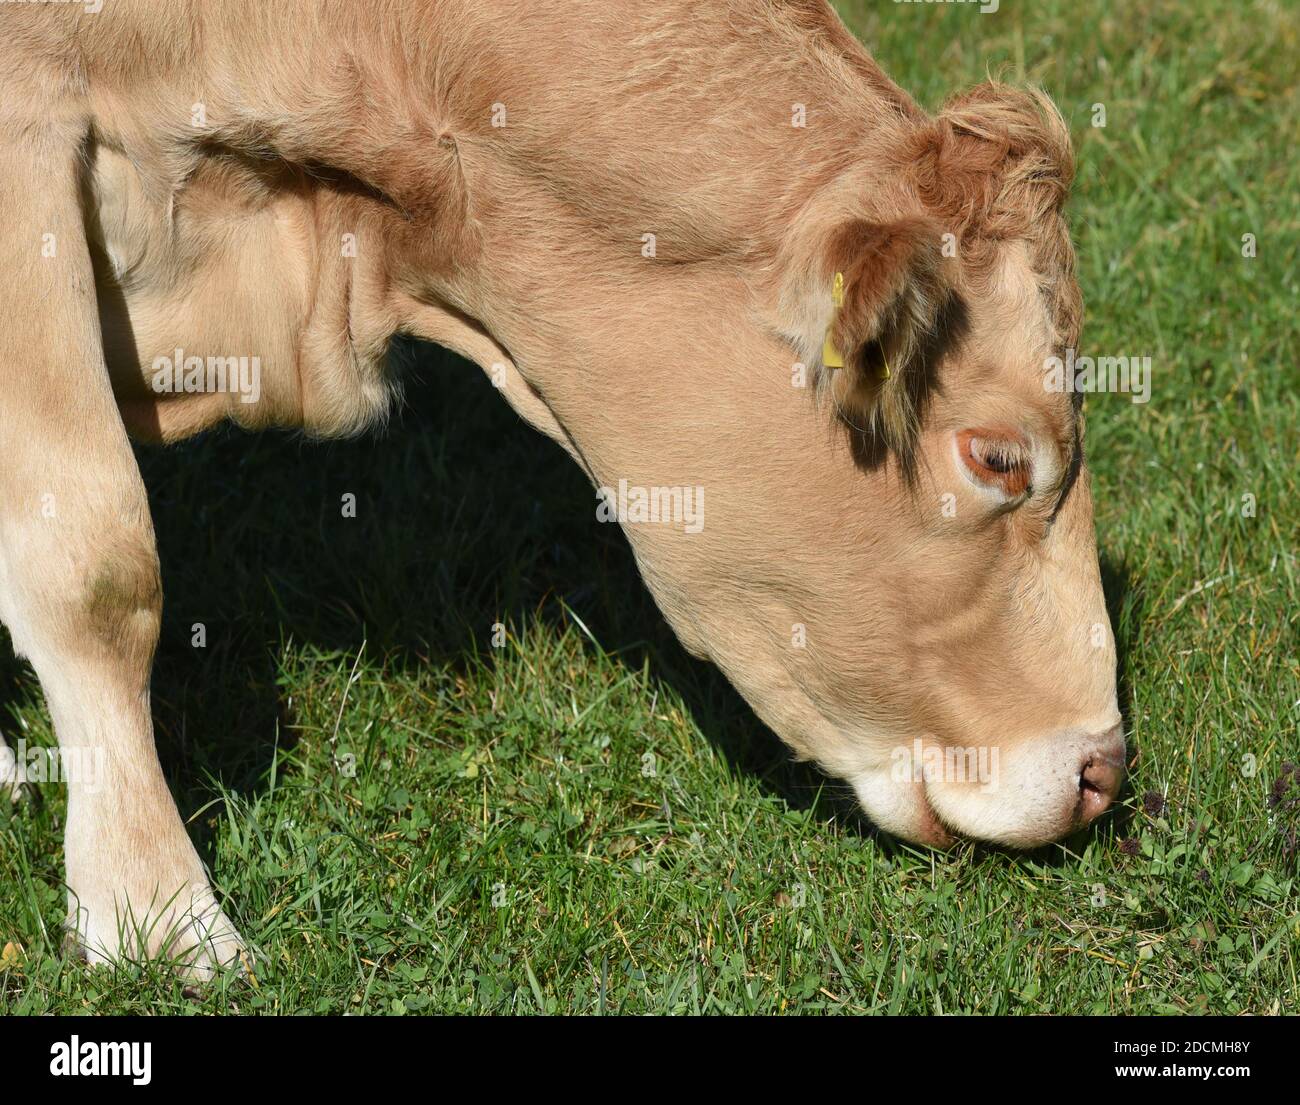 Kuhweide mit Rinder der Rasse Aquitaine. Cow pasture with cattle of the Aquitaine breed. Stock Photo